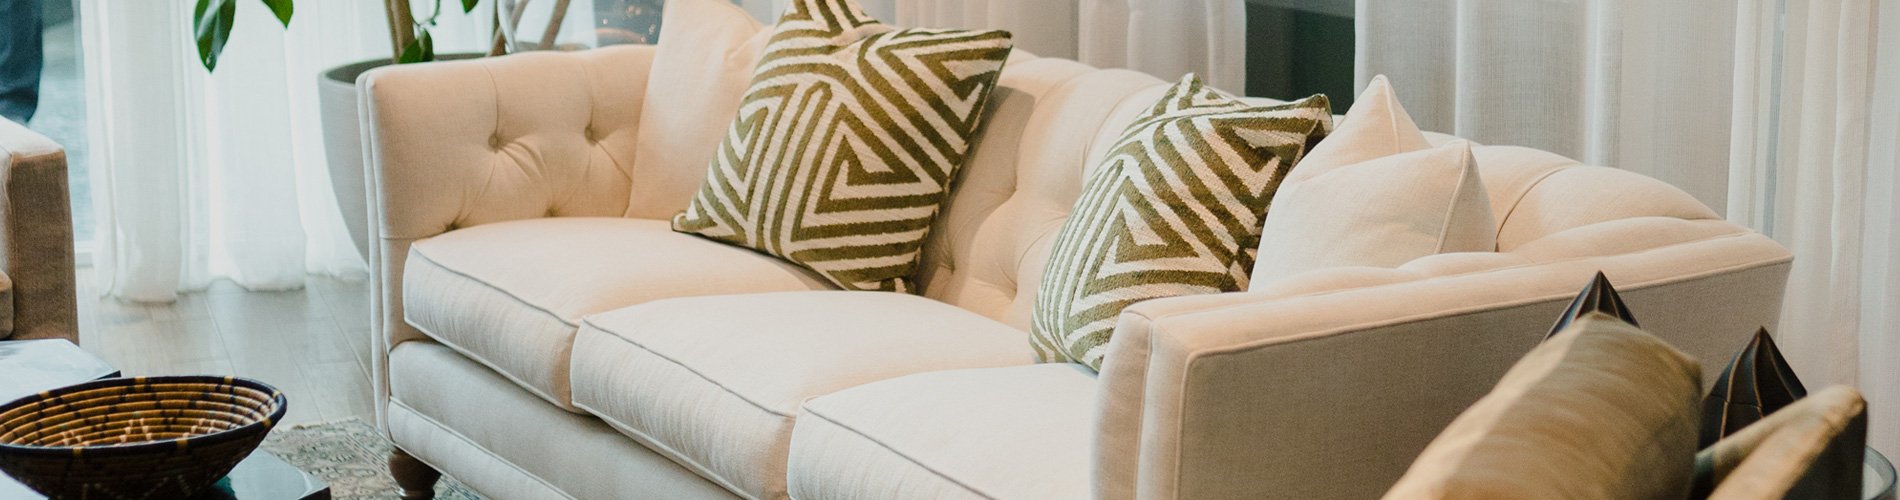 Cozy, Custom Sofas & Chairs for the Ultimate Staycation